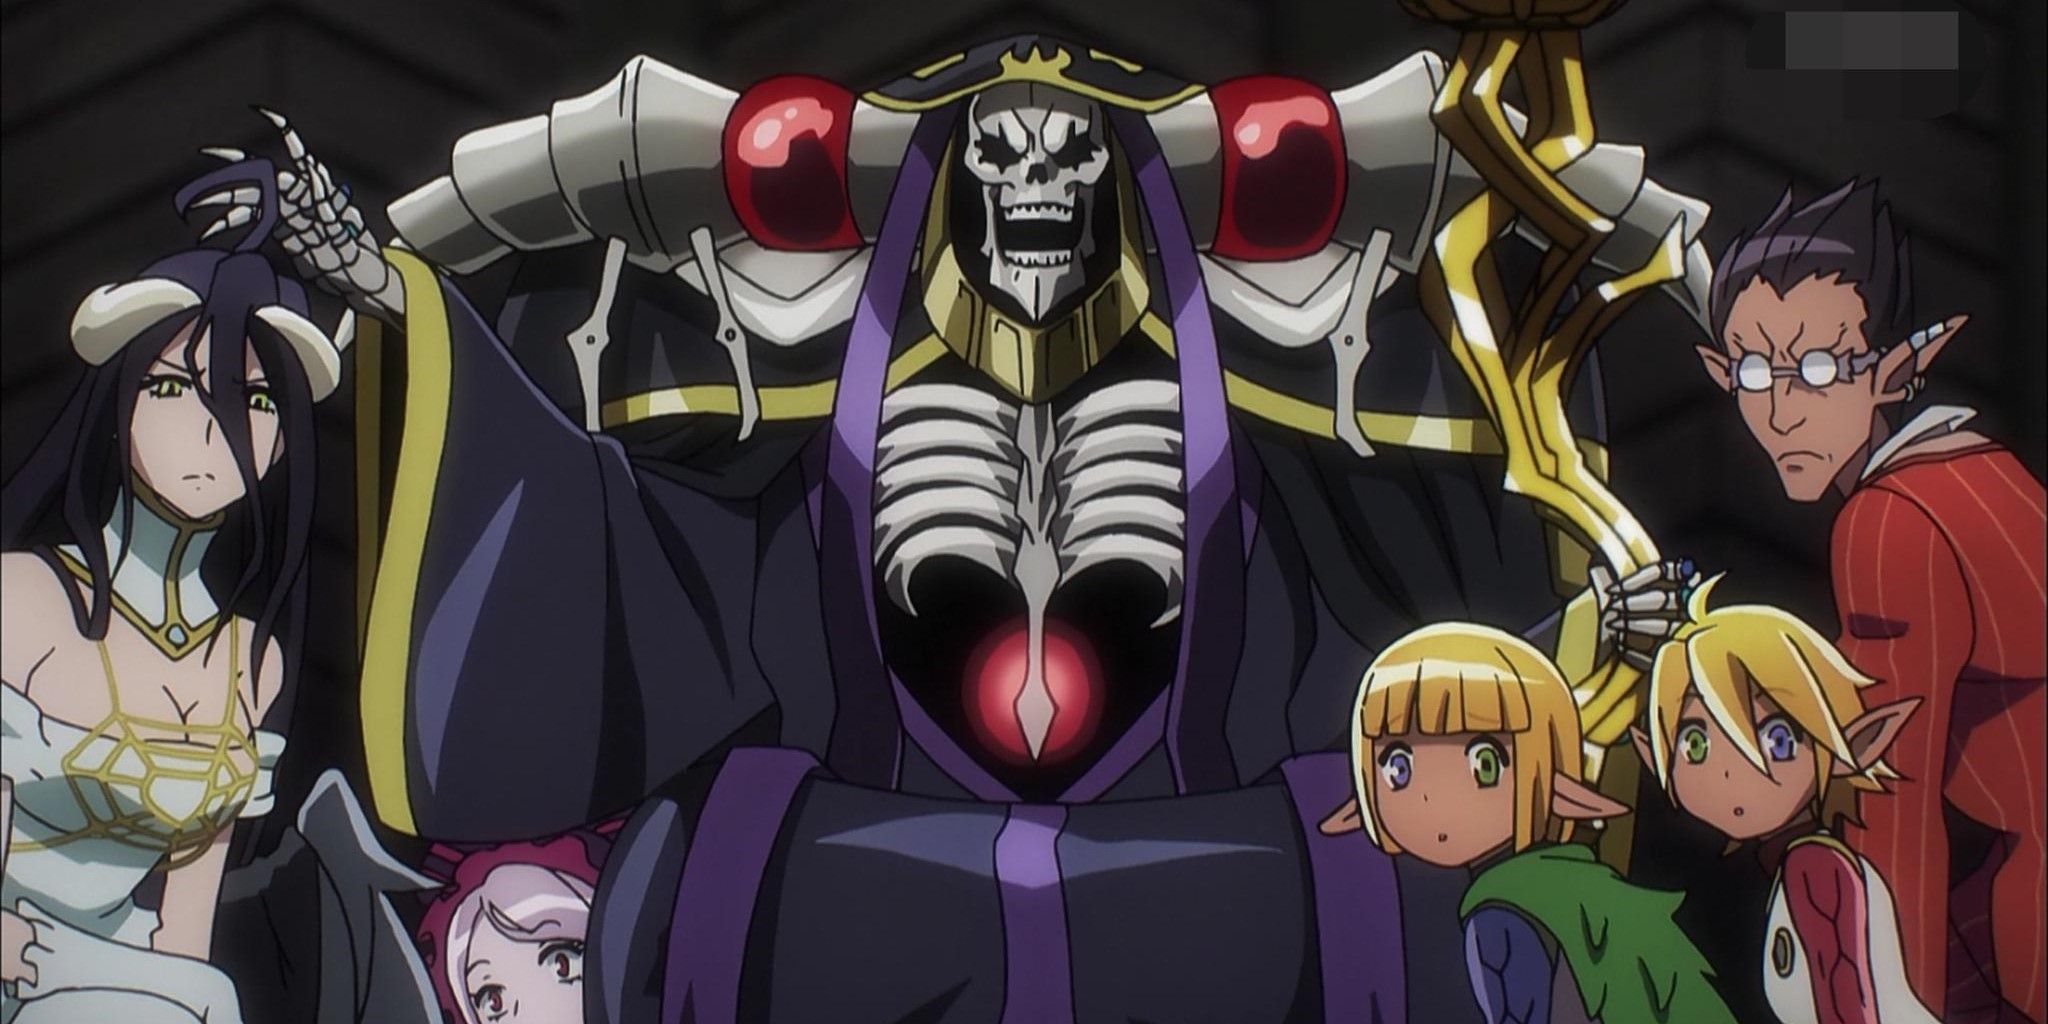 Best Overlord - Power of their MMO Character